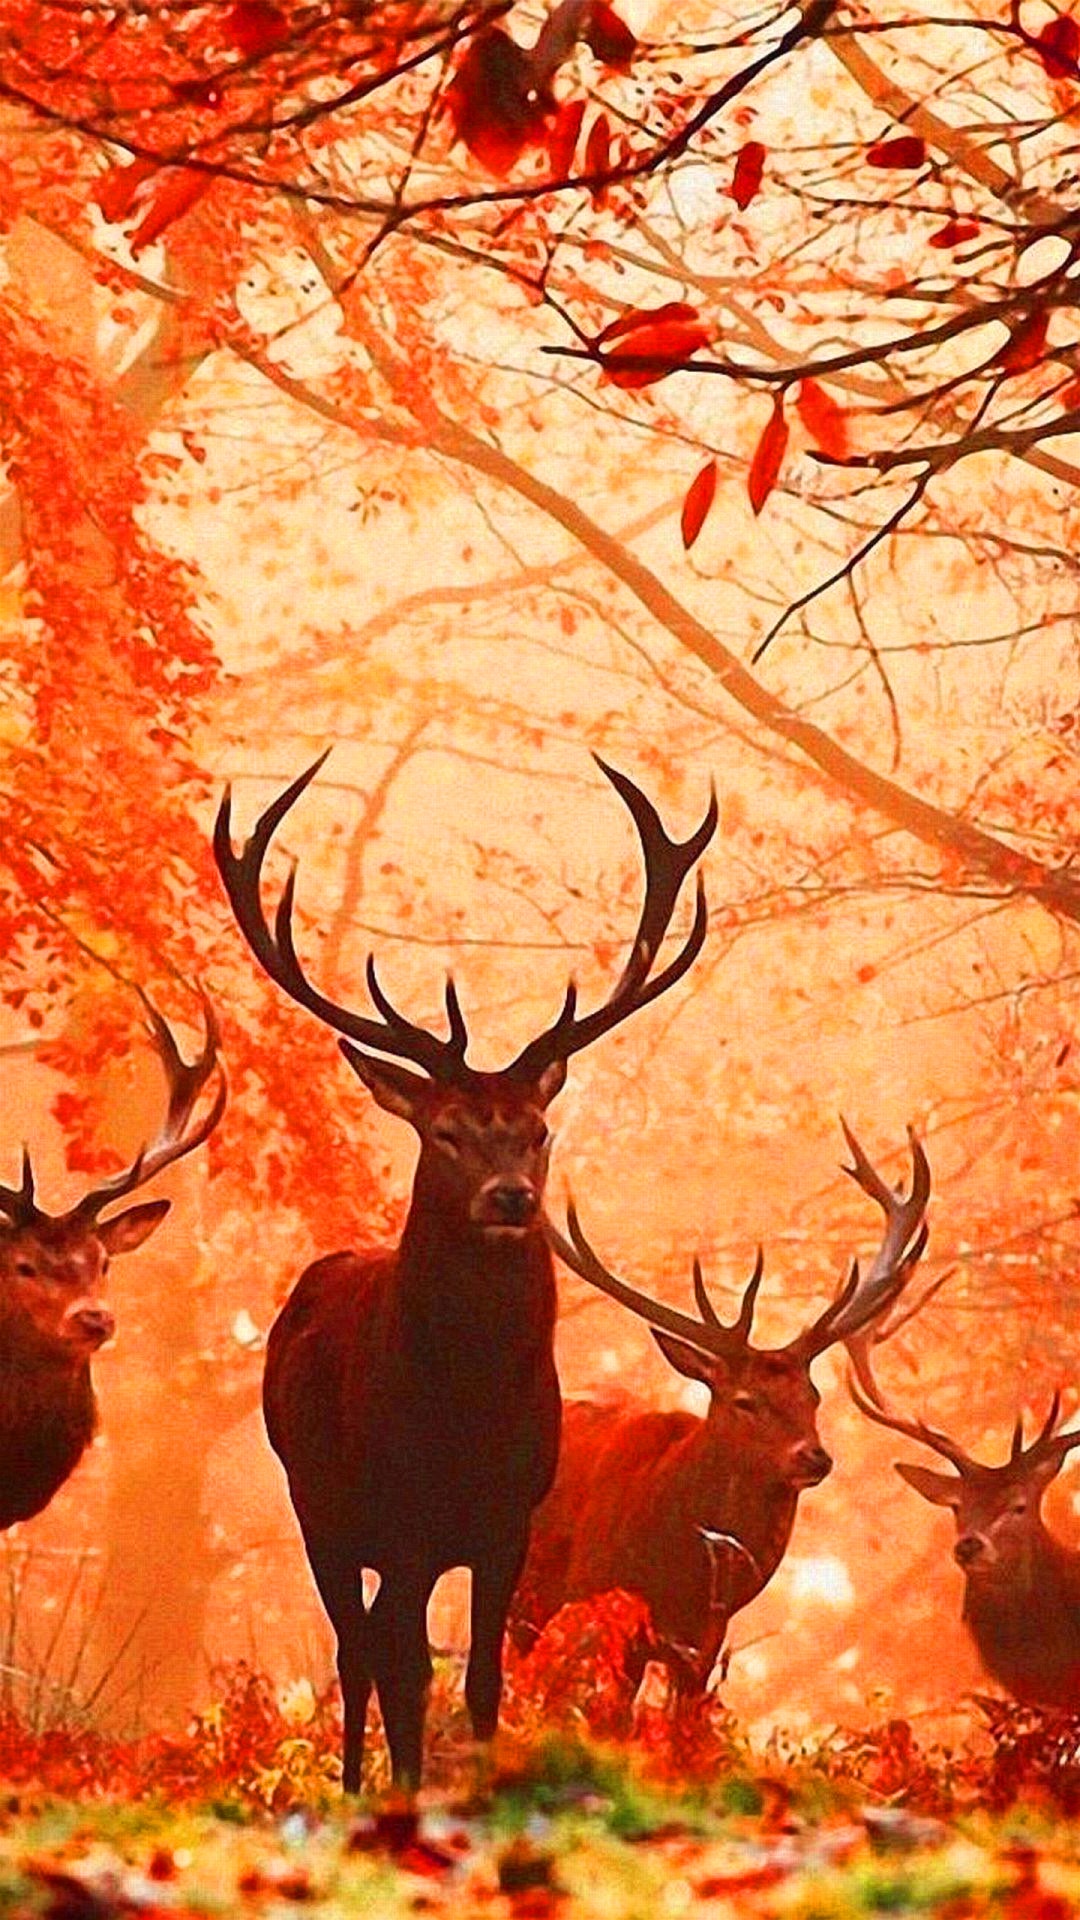 Deer Hunting Wallpaper iPhone Awesome HD